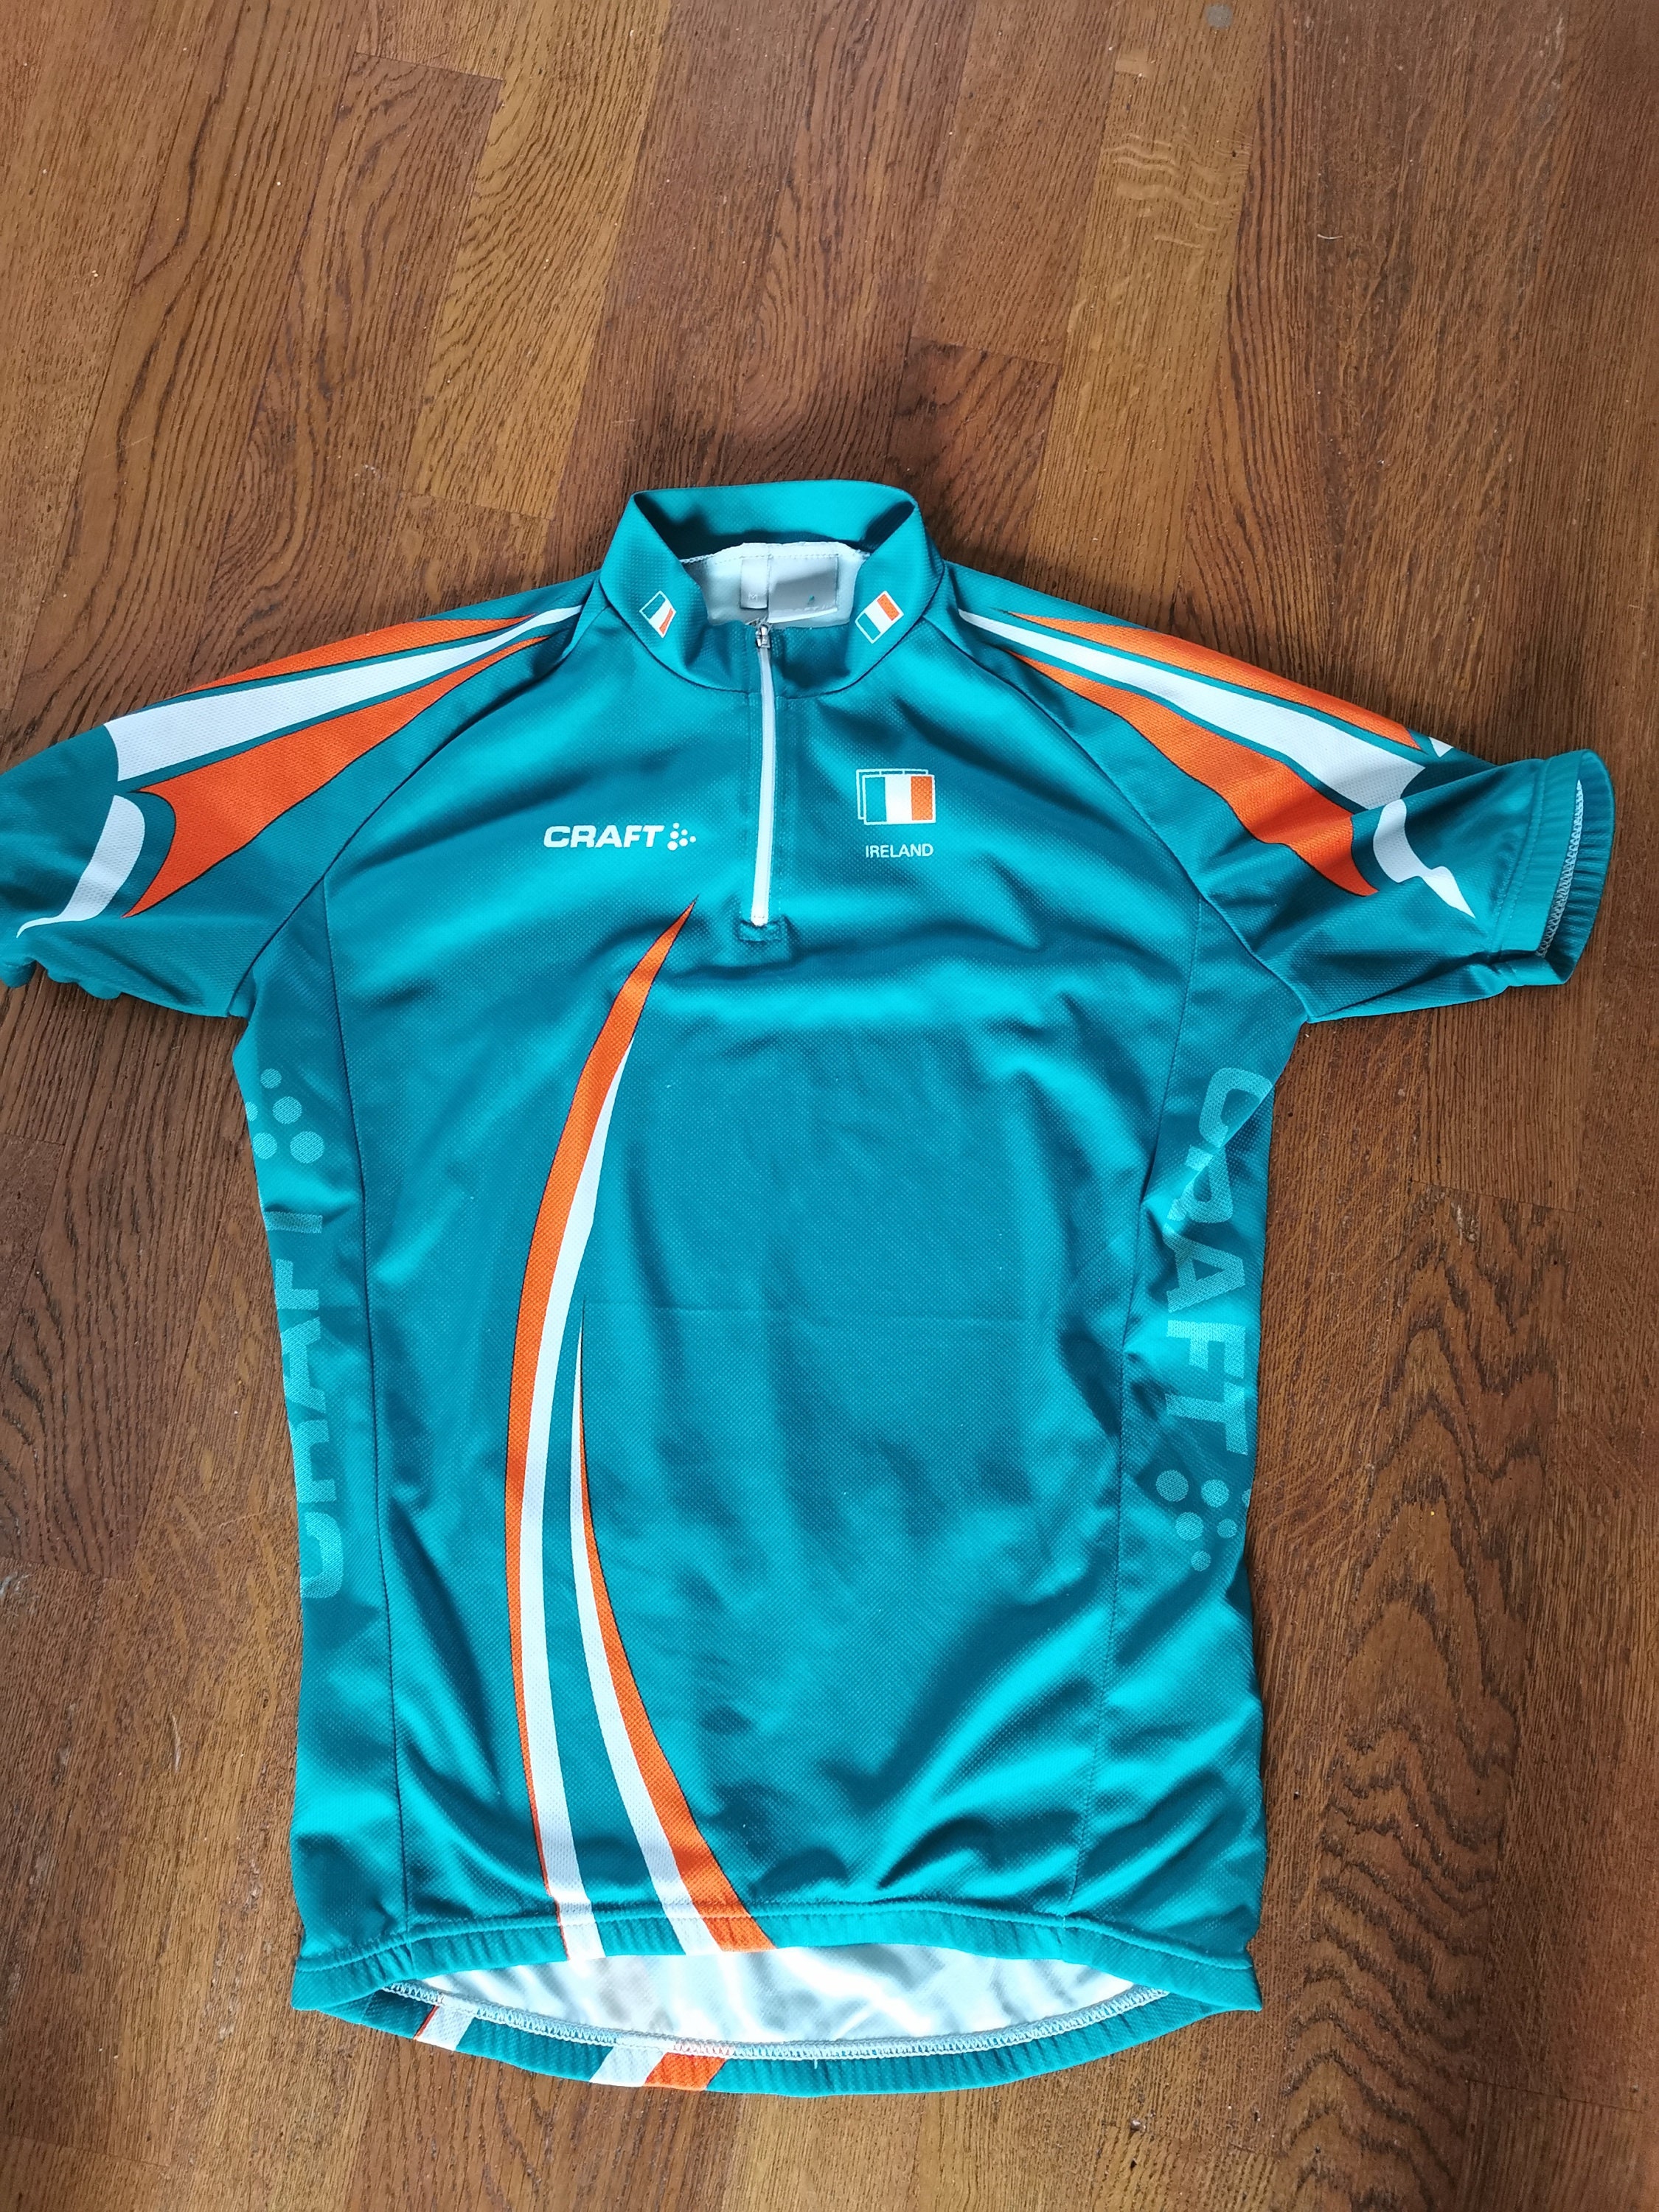 Vintage Cycling Jersey Team Ireland by Craft